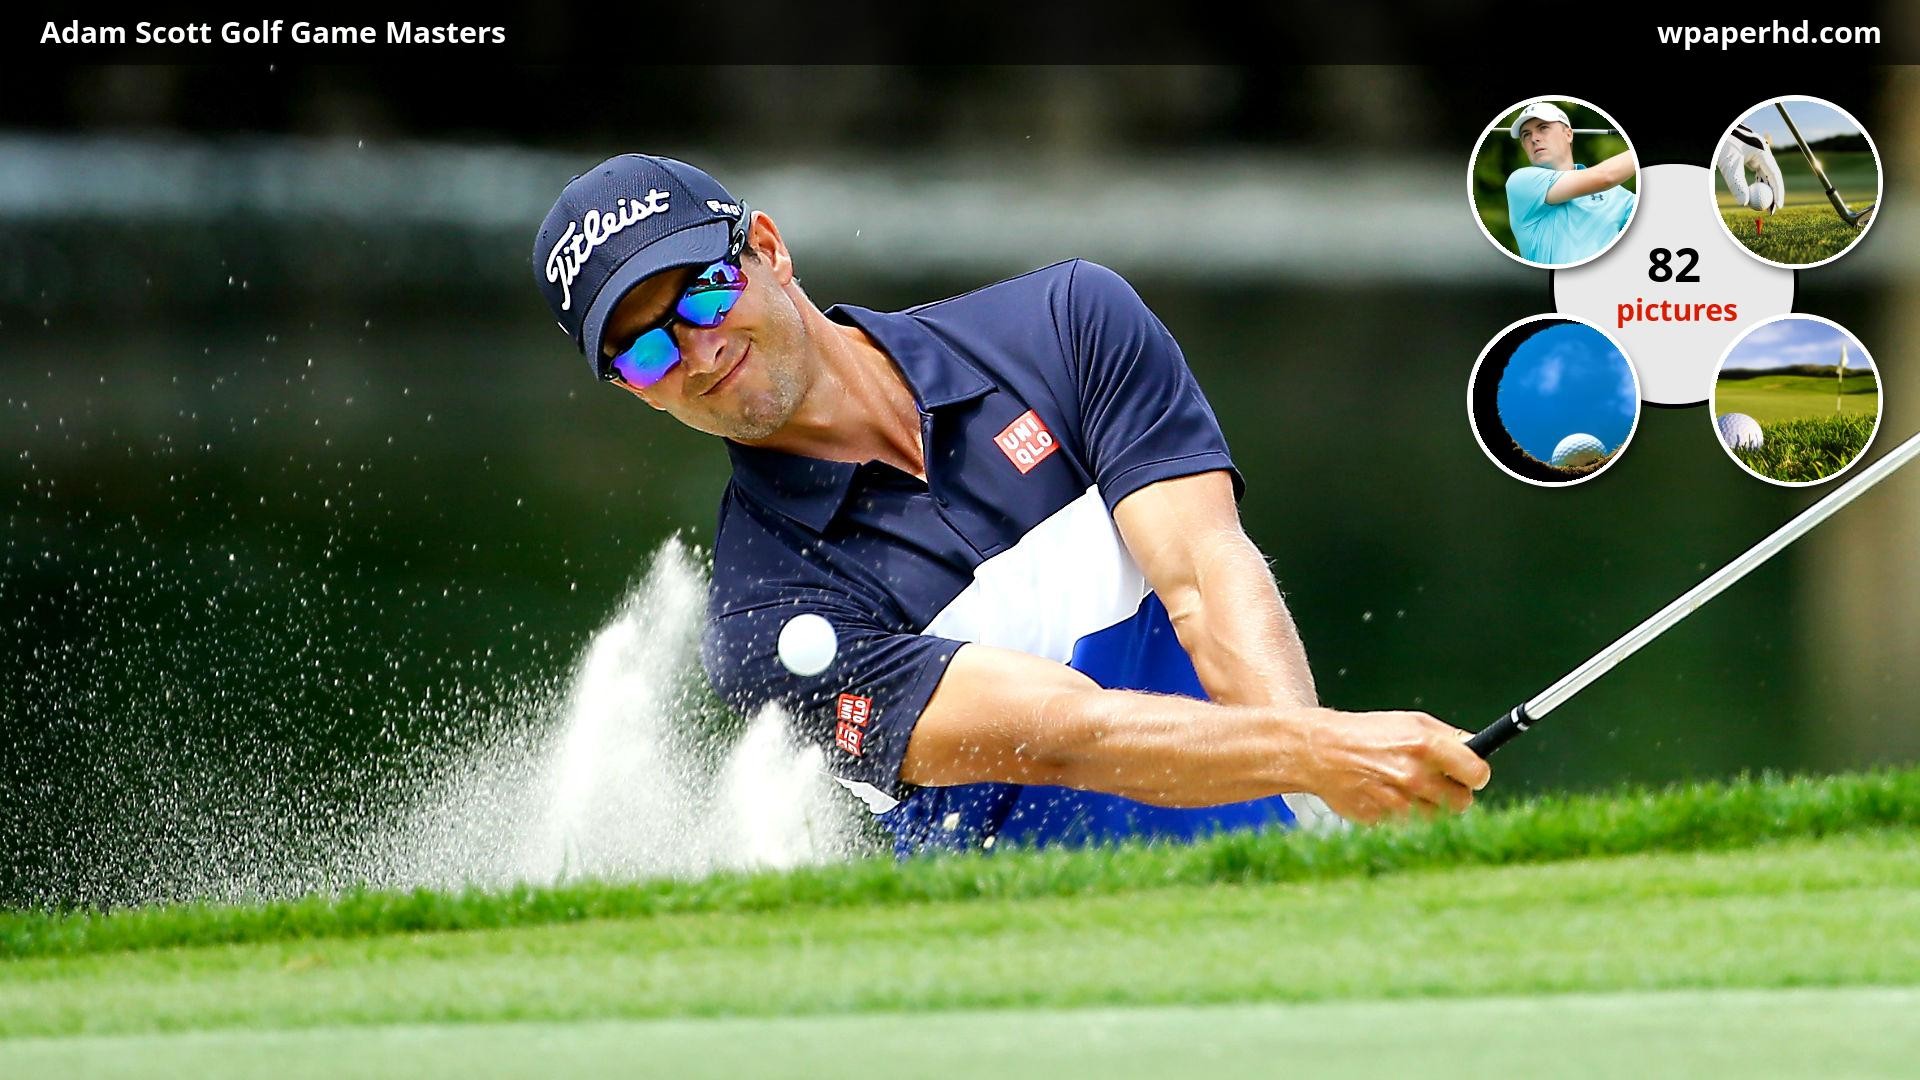 1920x1080 ... Golf Game Masters wallpaper, where you can download this picture in  Original size and ...